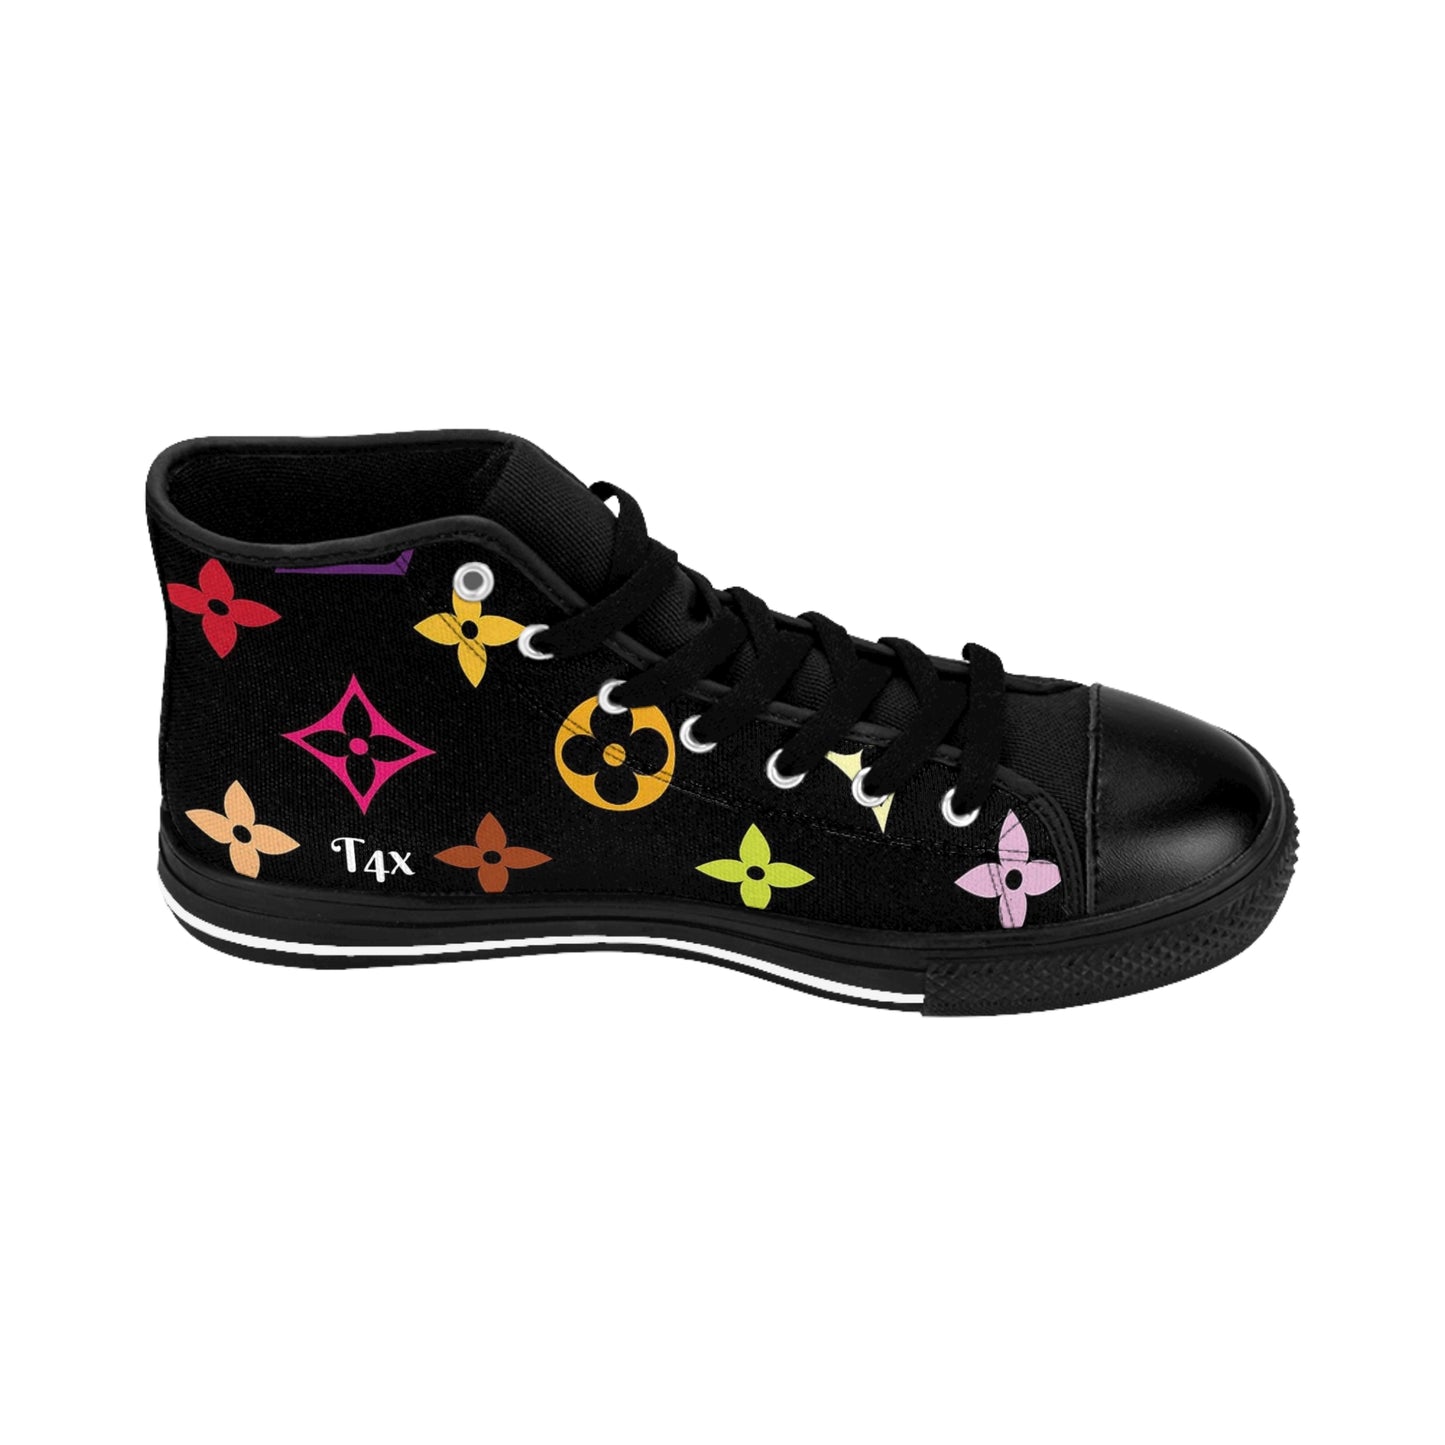 T4x Women's In Color Fashion Classic High Top Sneakers